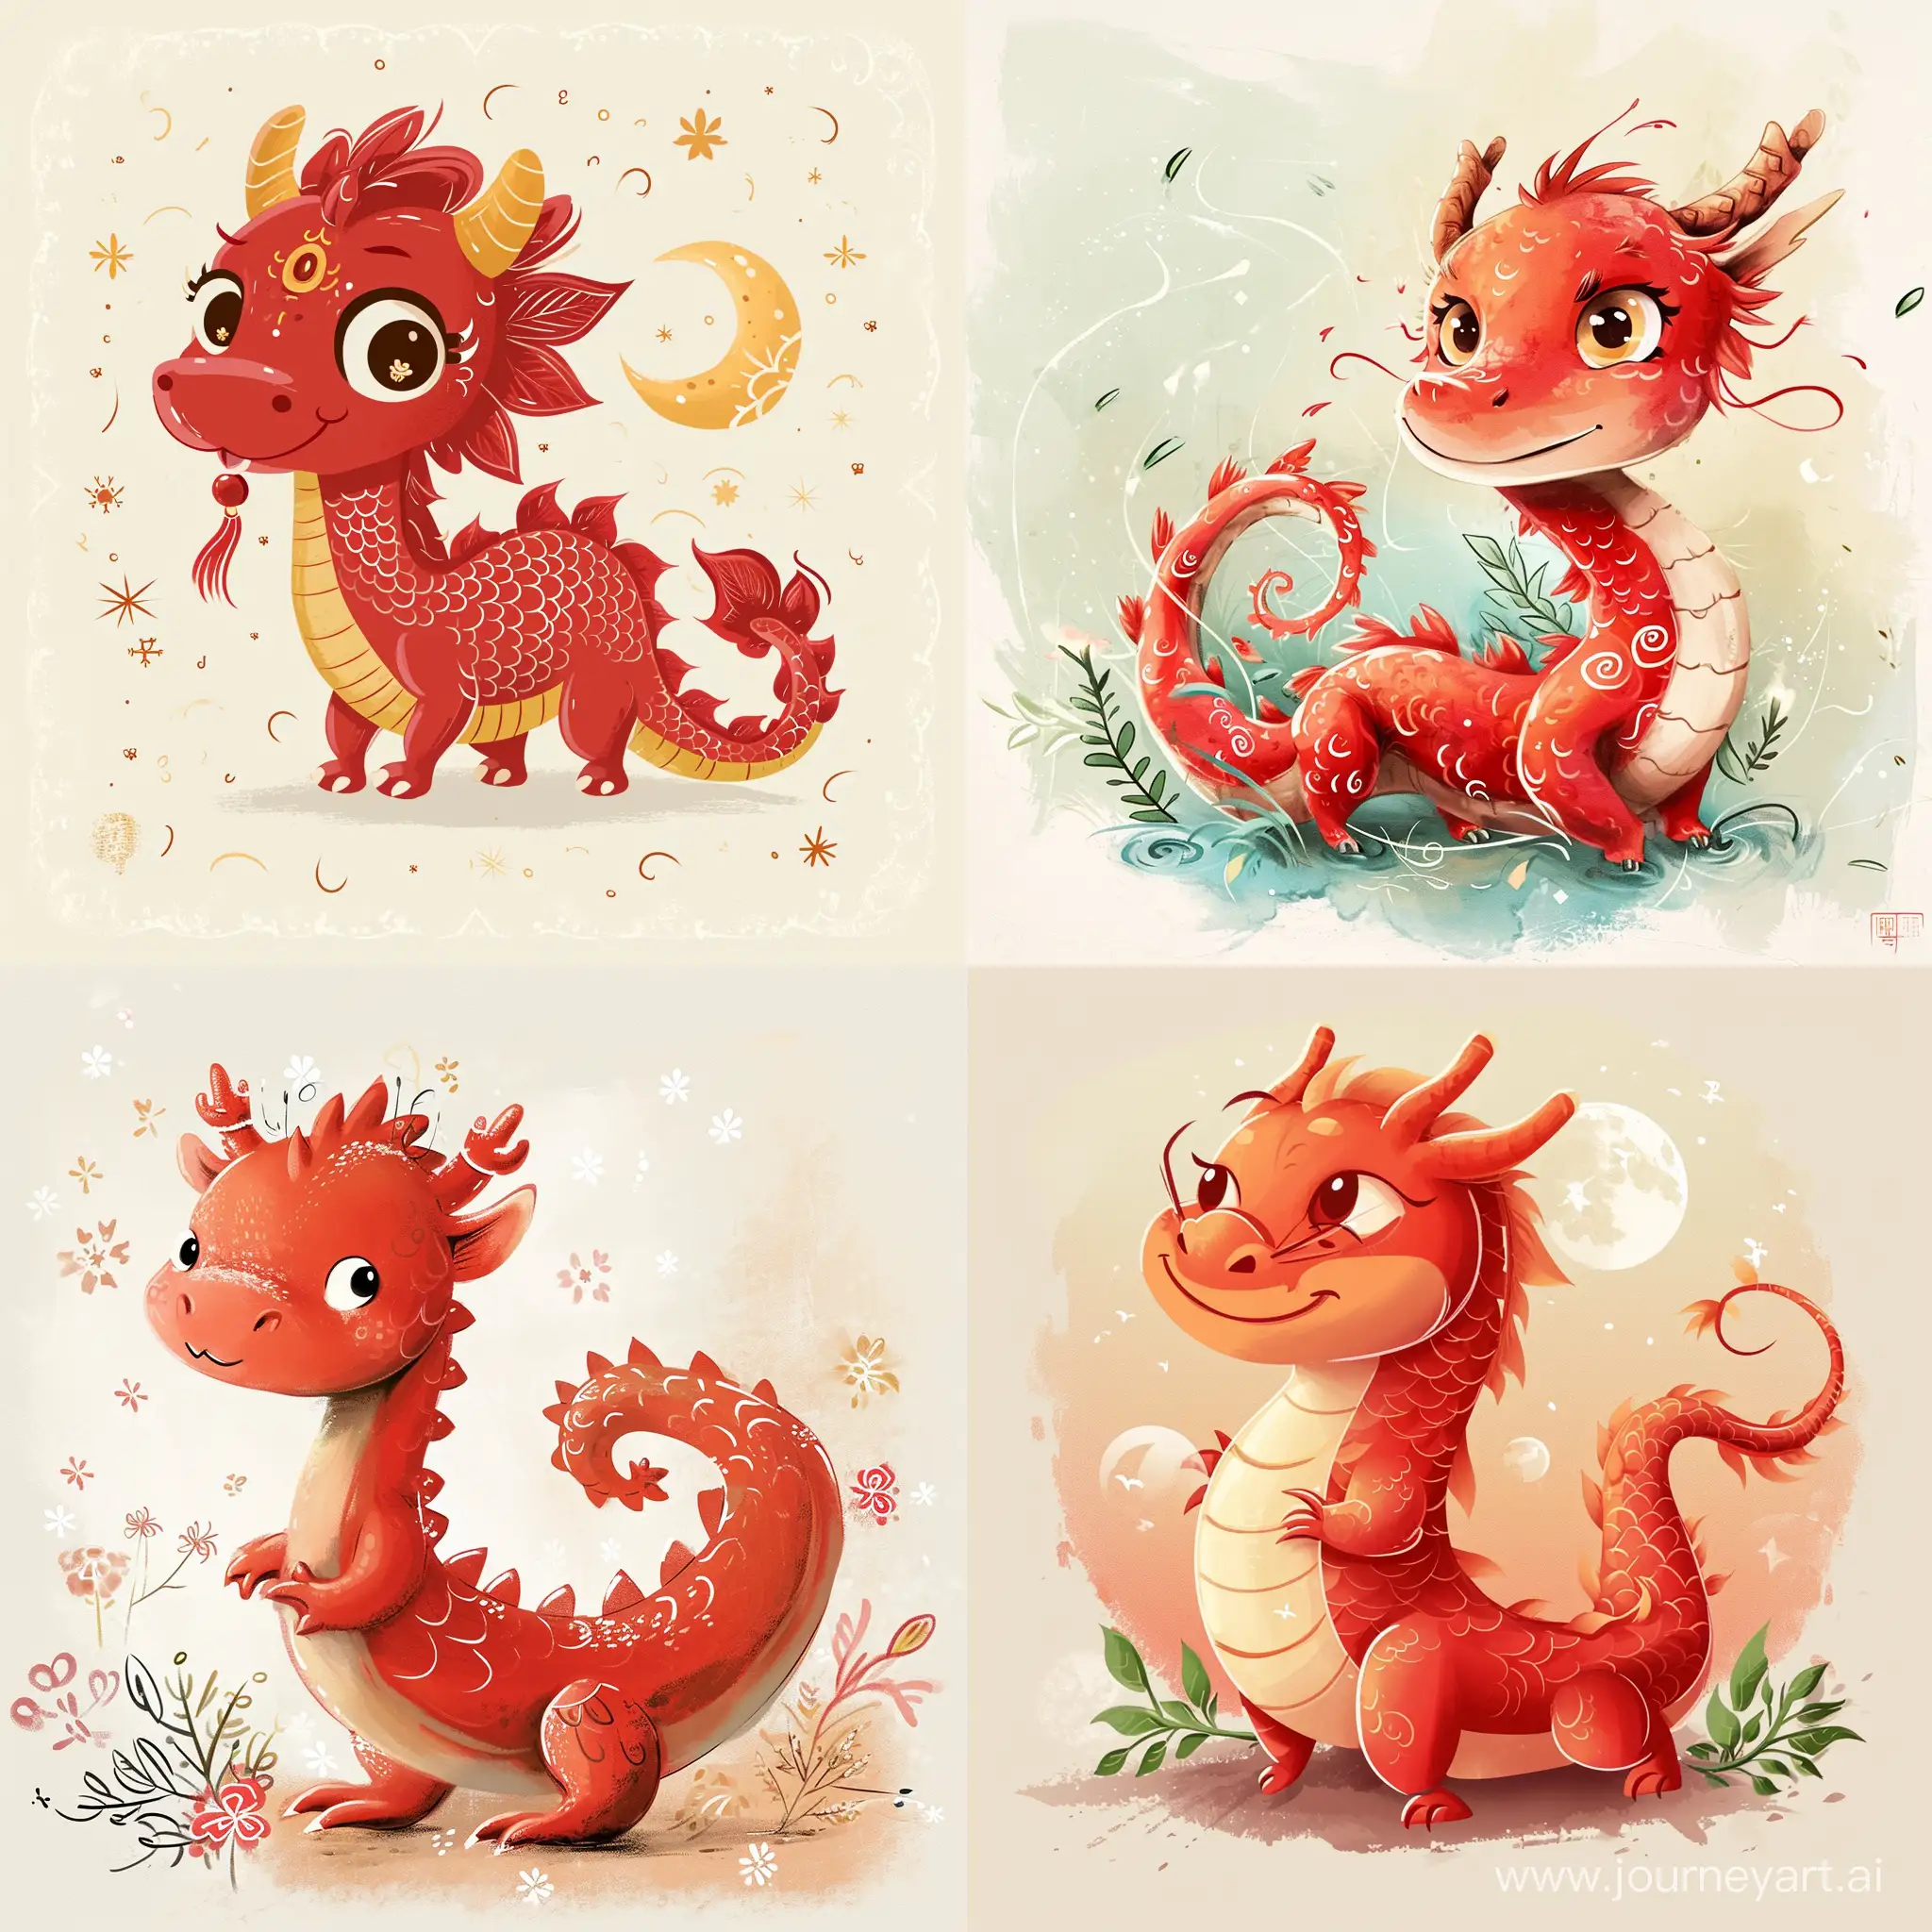 Adorable-Red-Dragon-Celebrating-Lunar-New-Year